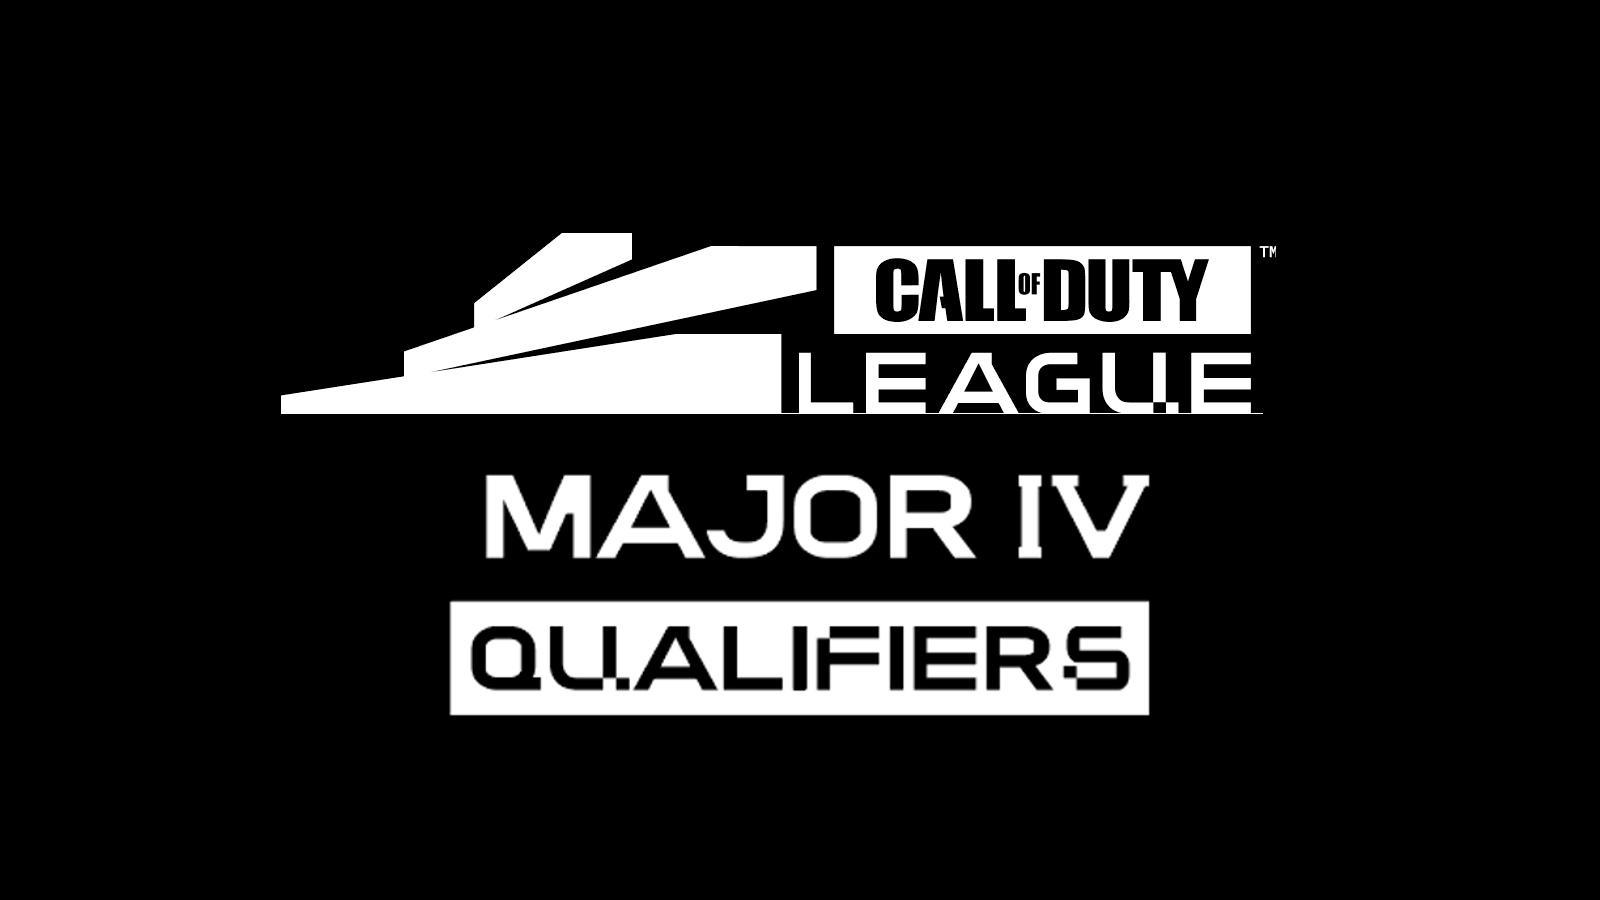 Call of Duty League Major 4 qualifiers logo on black background